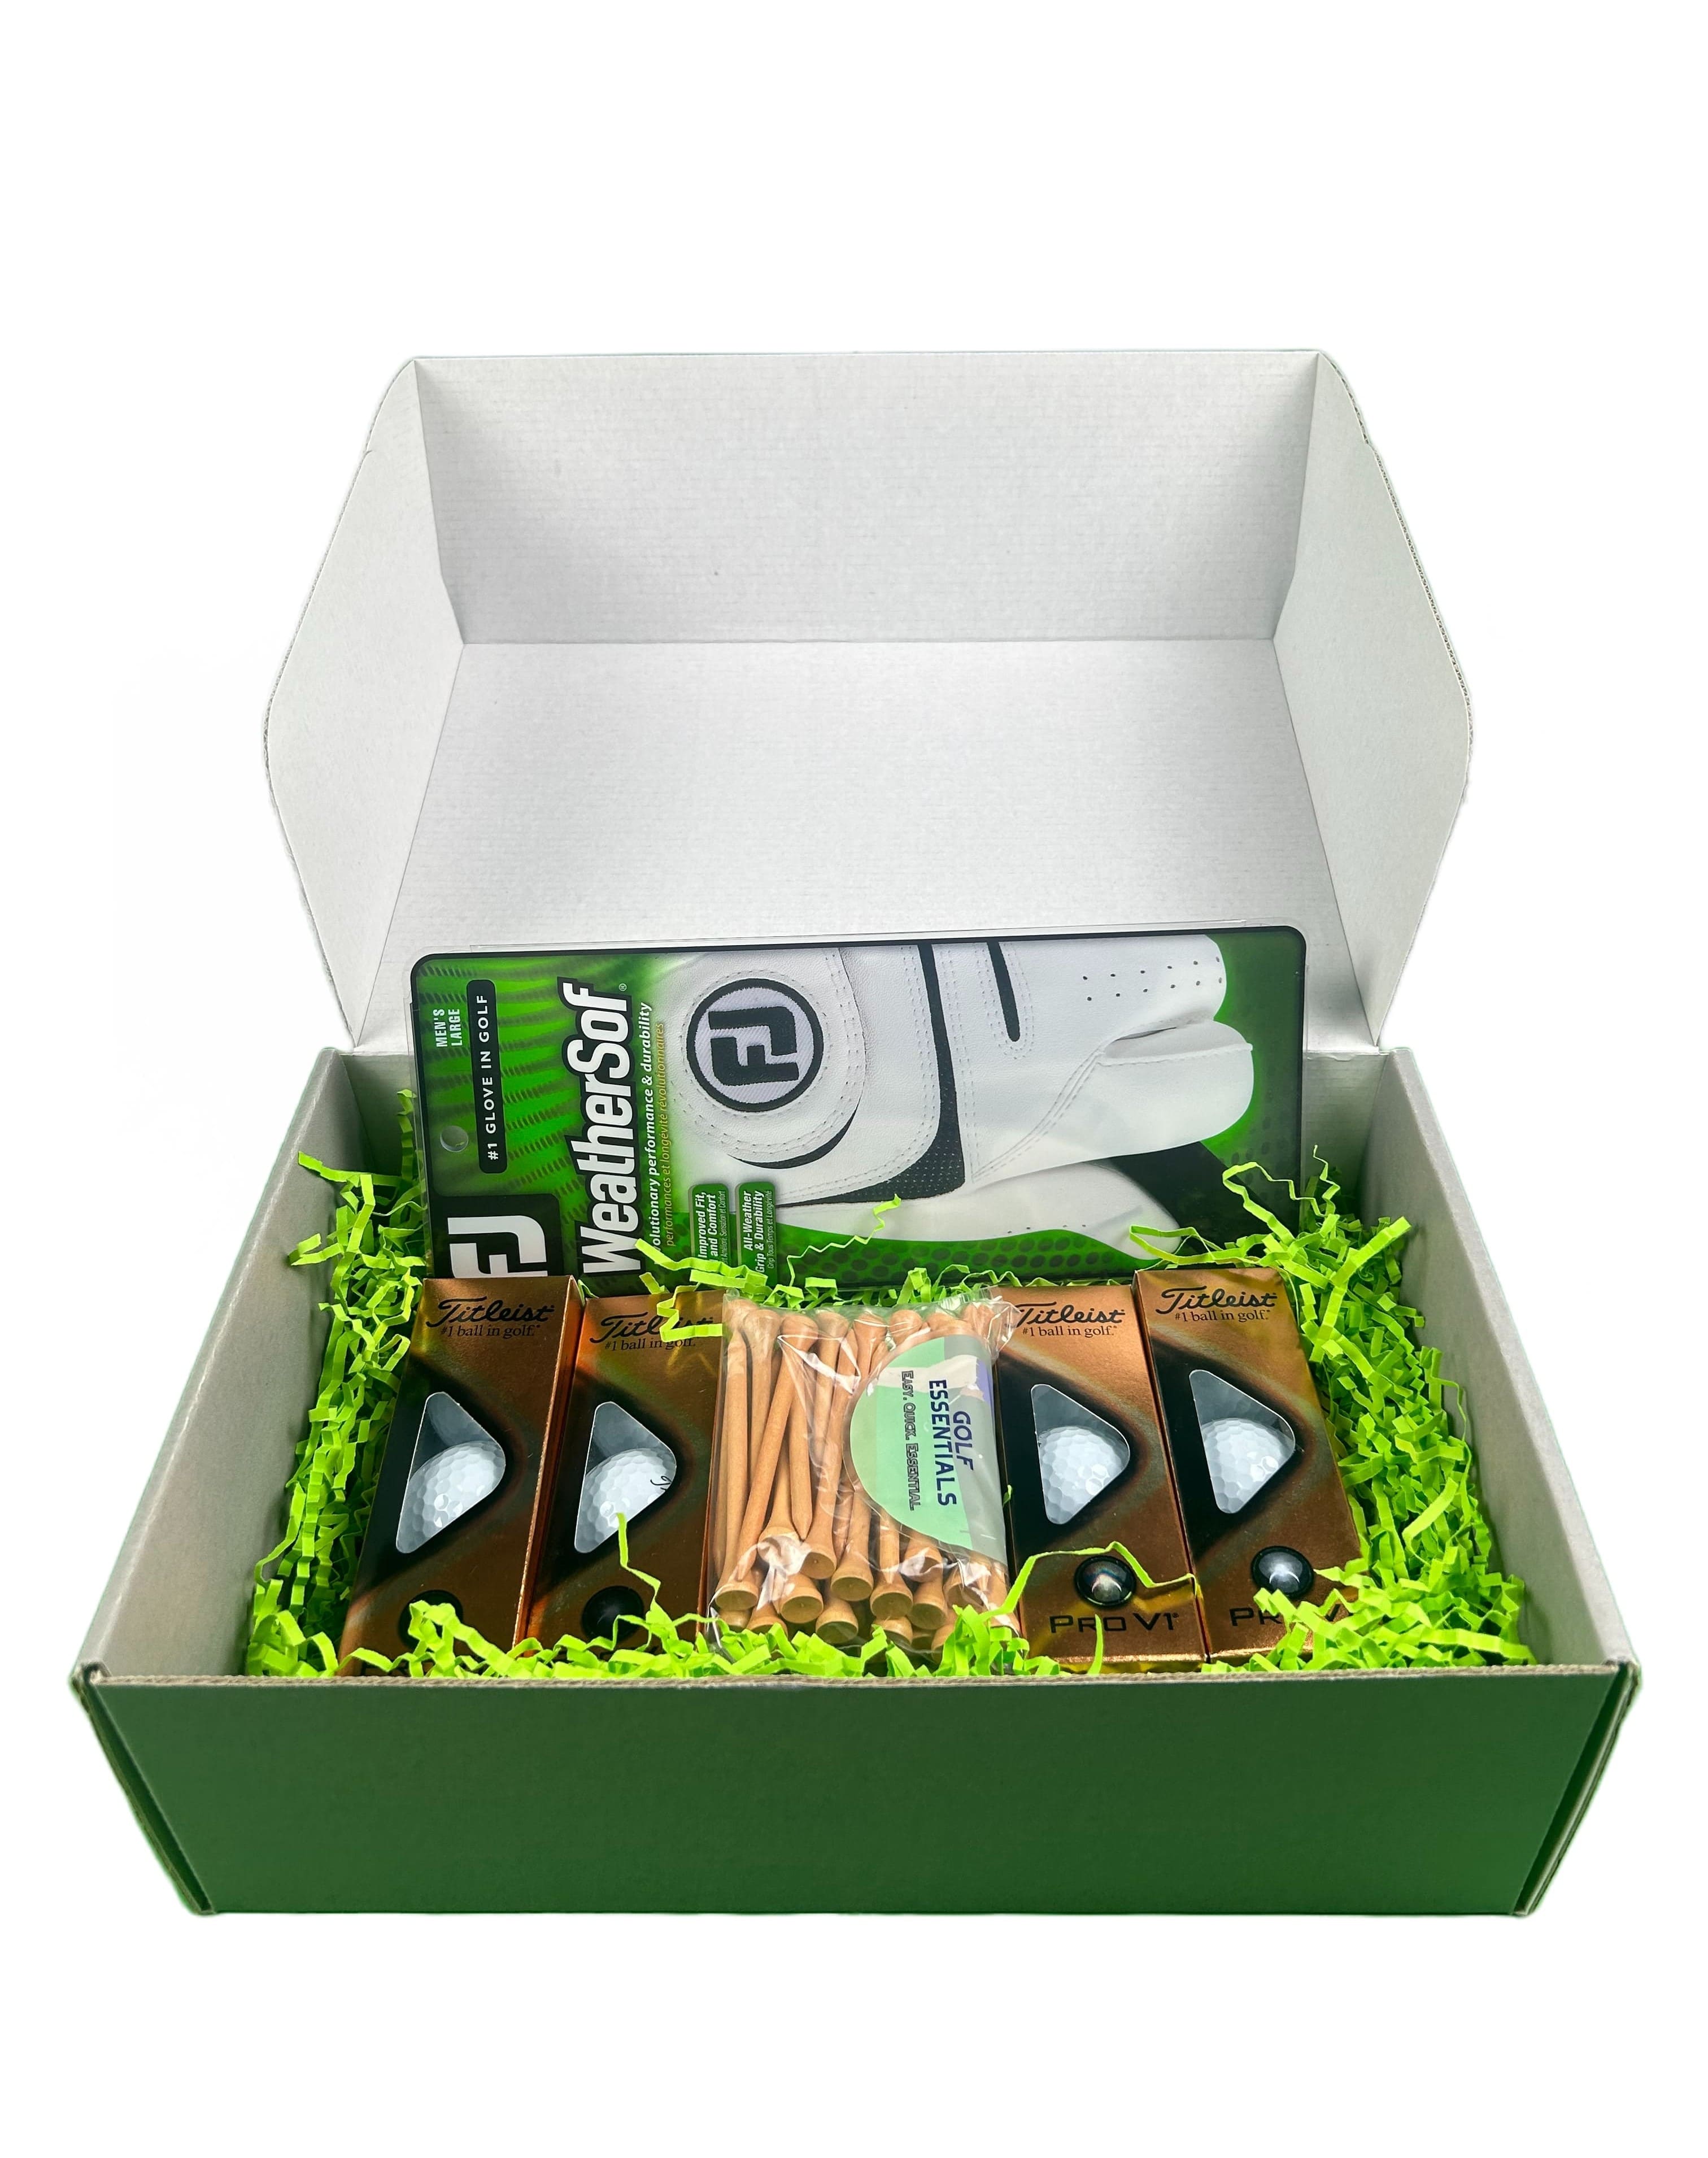 Golf Essentials box with prov1s and weathersof glove in the green grass filler.